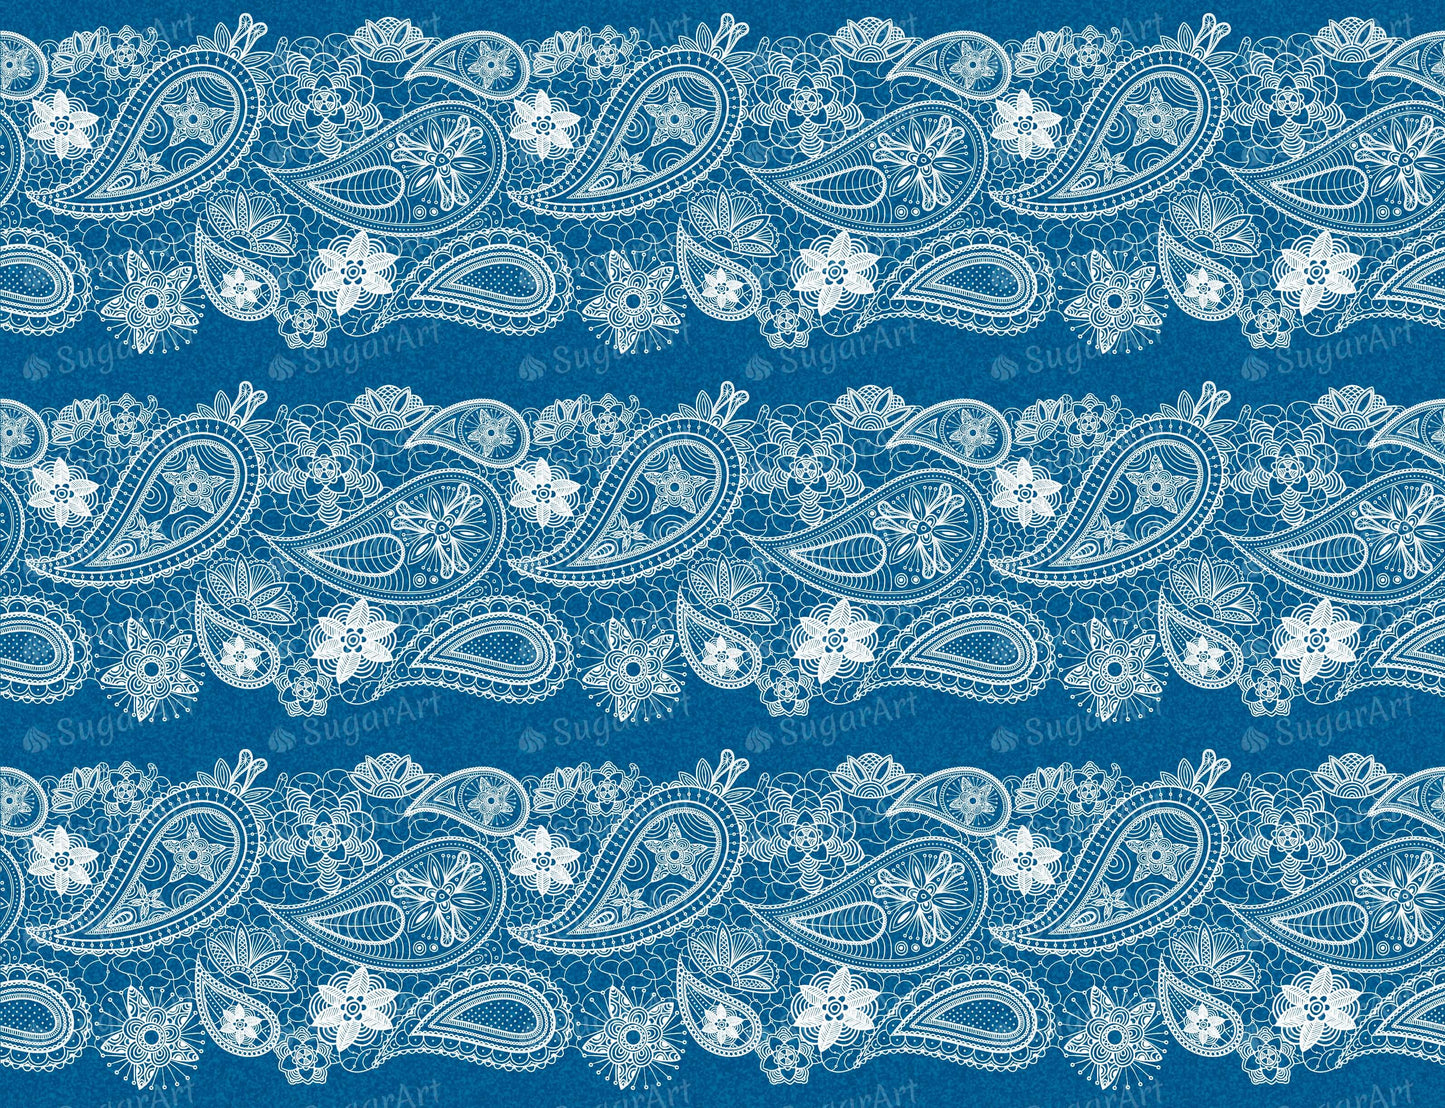 Vintage Paisley Lace On Blue - Edible Fabric - EF012.